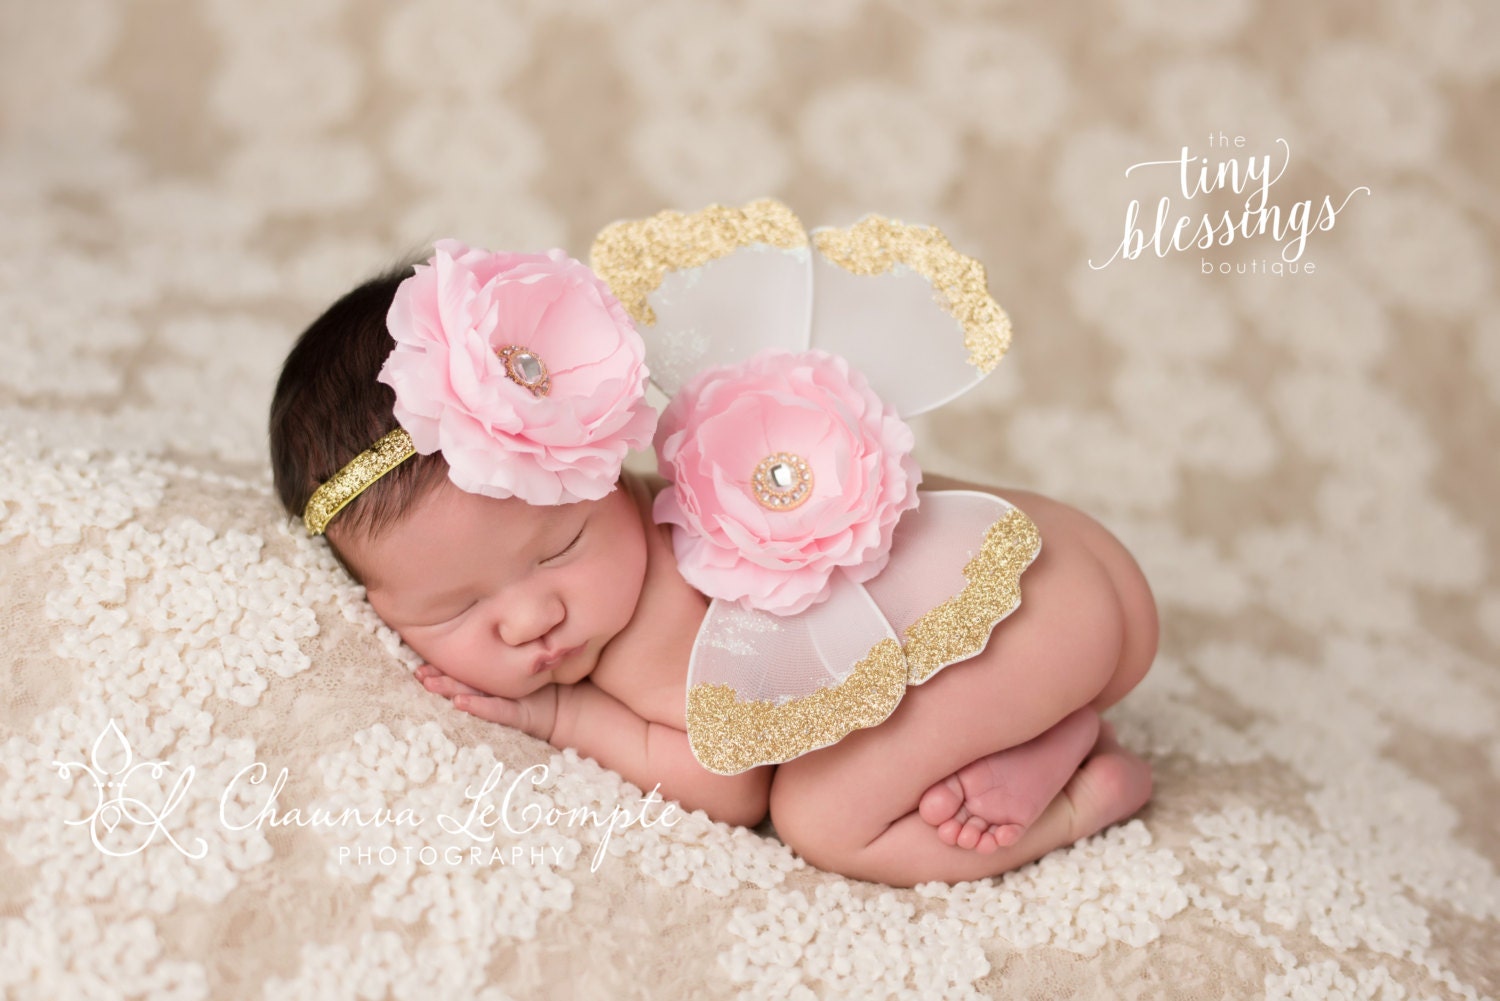 Baby Wing and Headband Set,  Gold and Baby Pink Wing Set, Newborn Wing Prop, Newborn Wings, Baby Wing Prop, Wing Photo Prop, Photo Prop